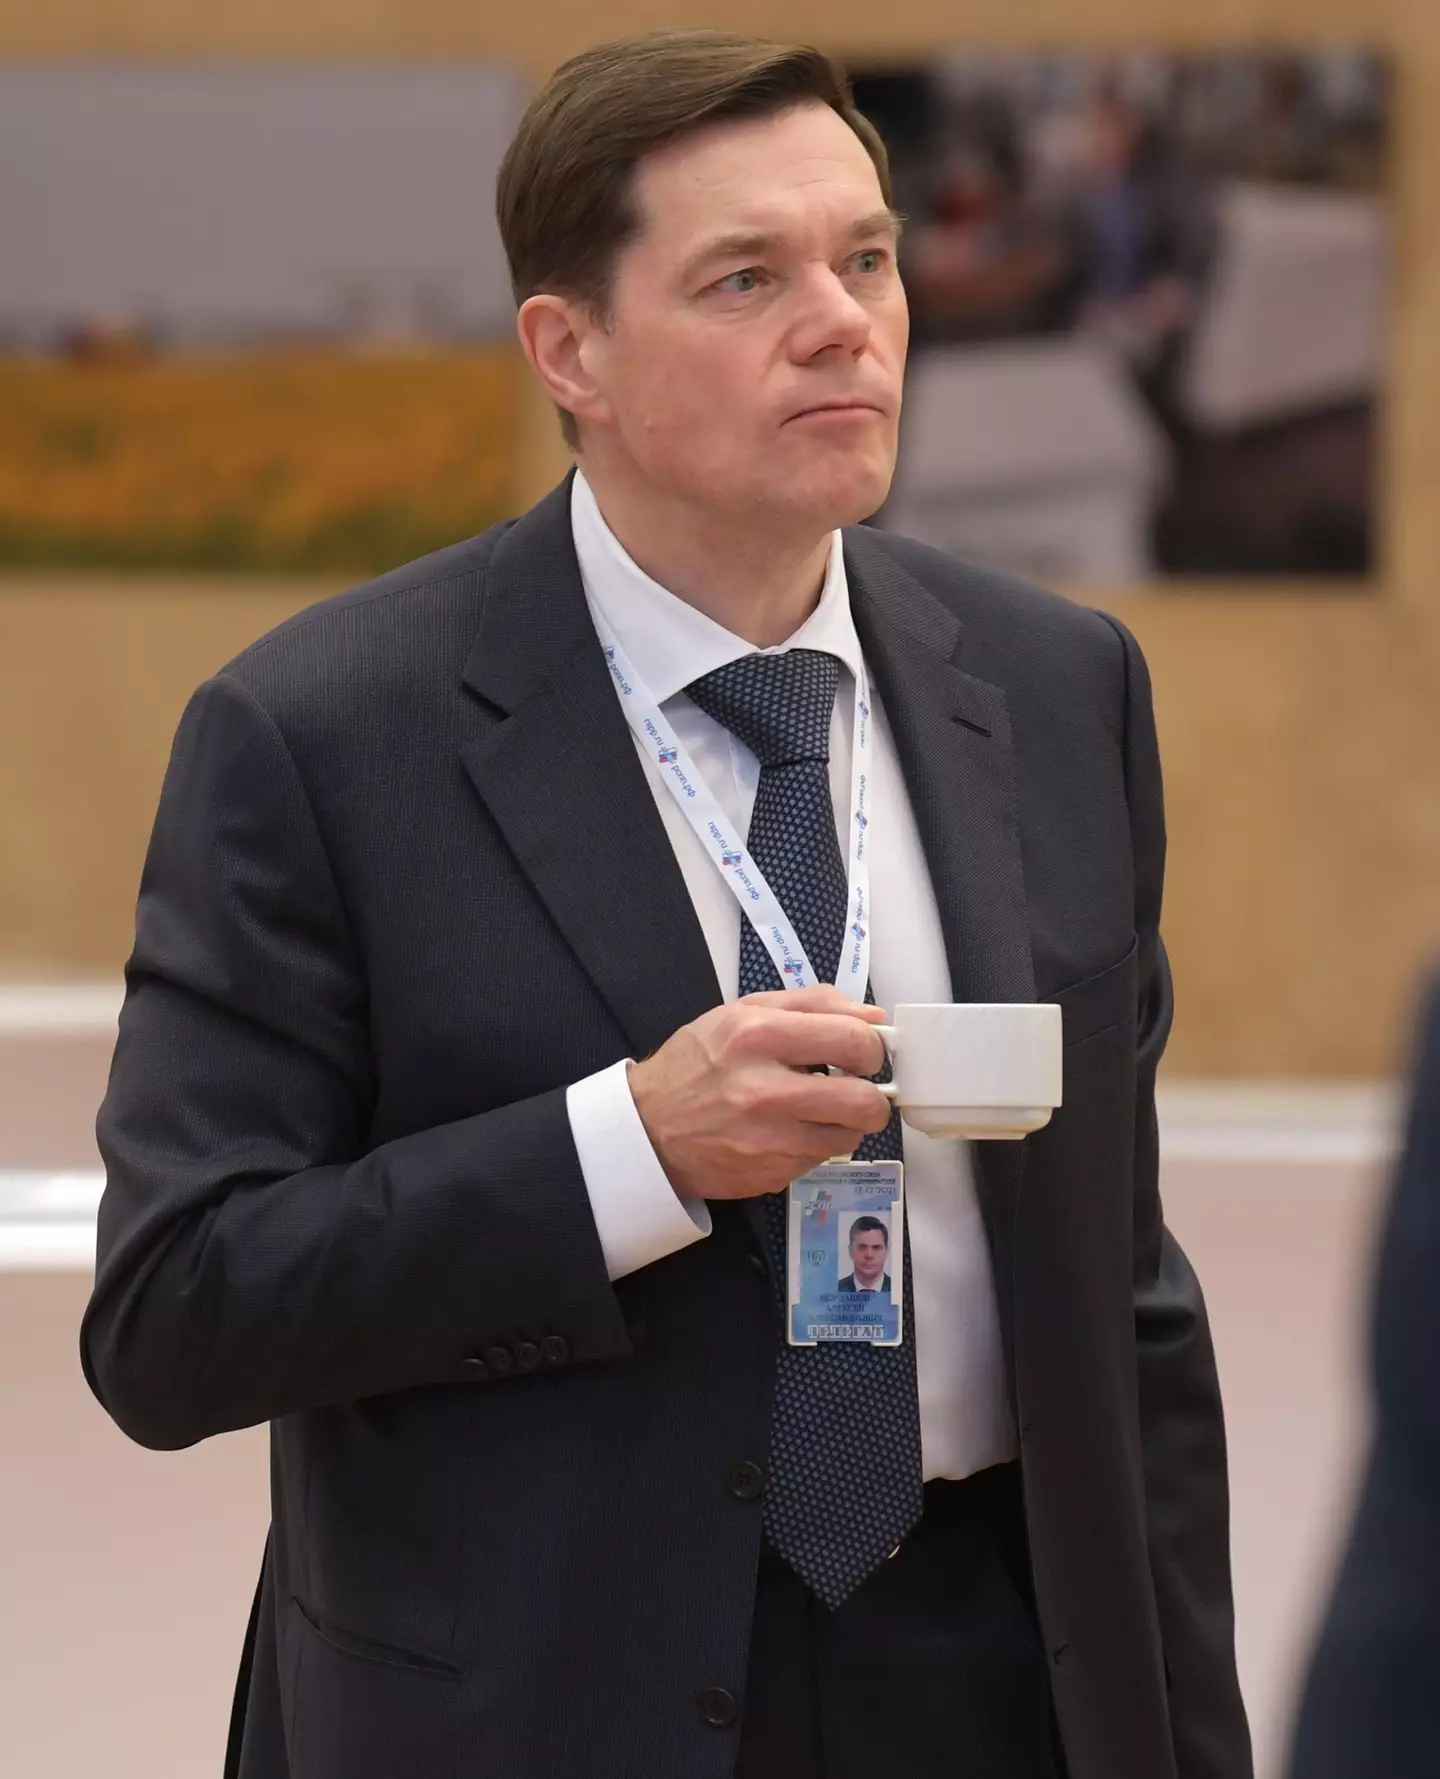 Lady M is owned by Russia's richest man Alexey Mordashov.